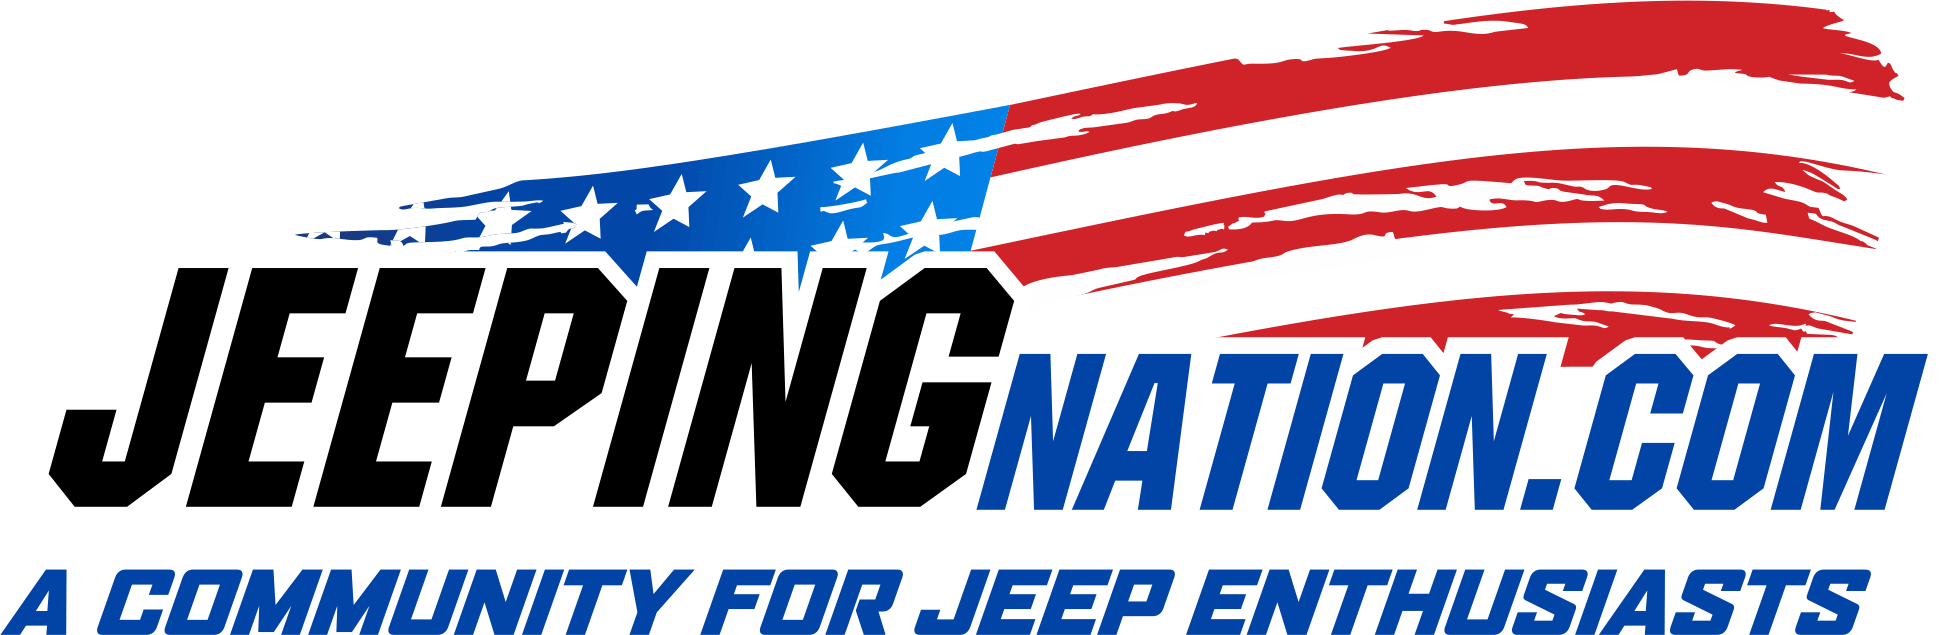 Jeeping Nation Events